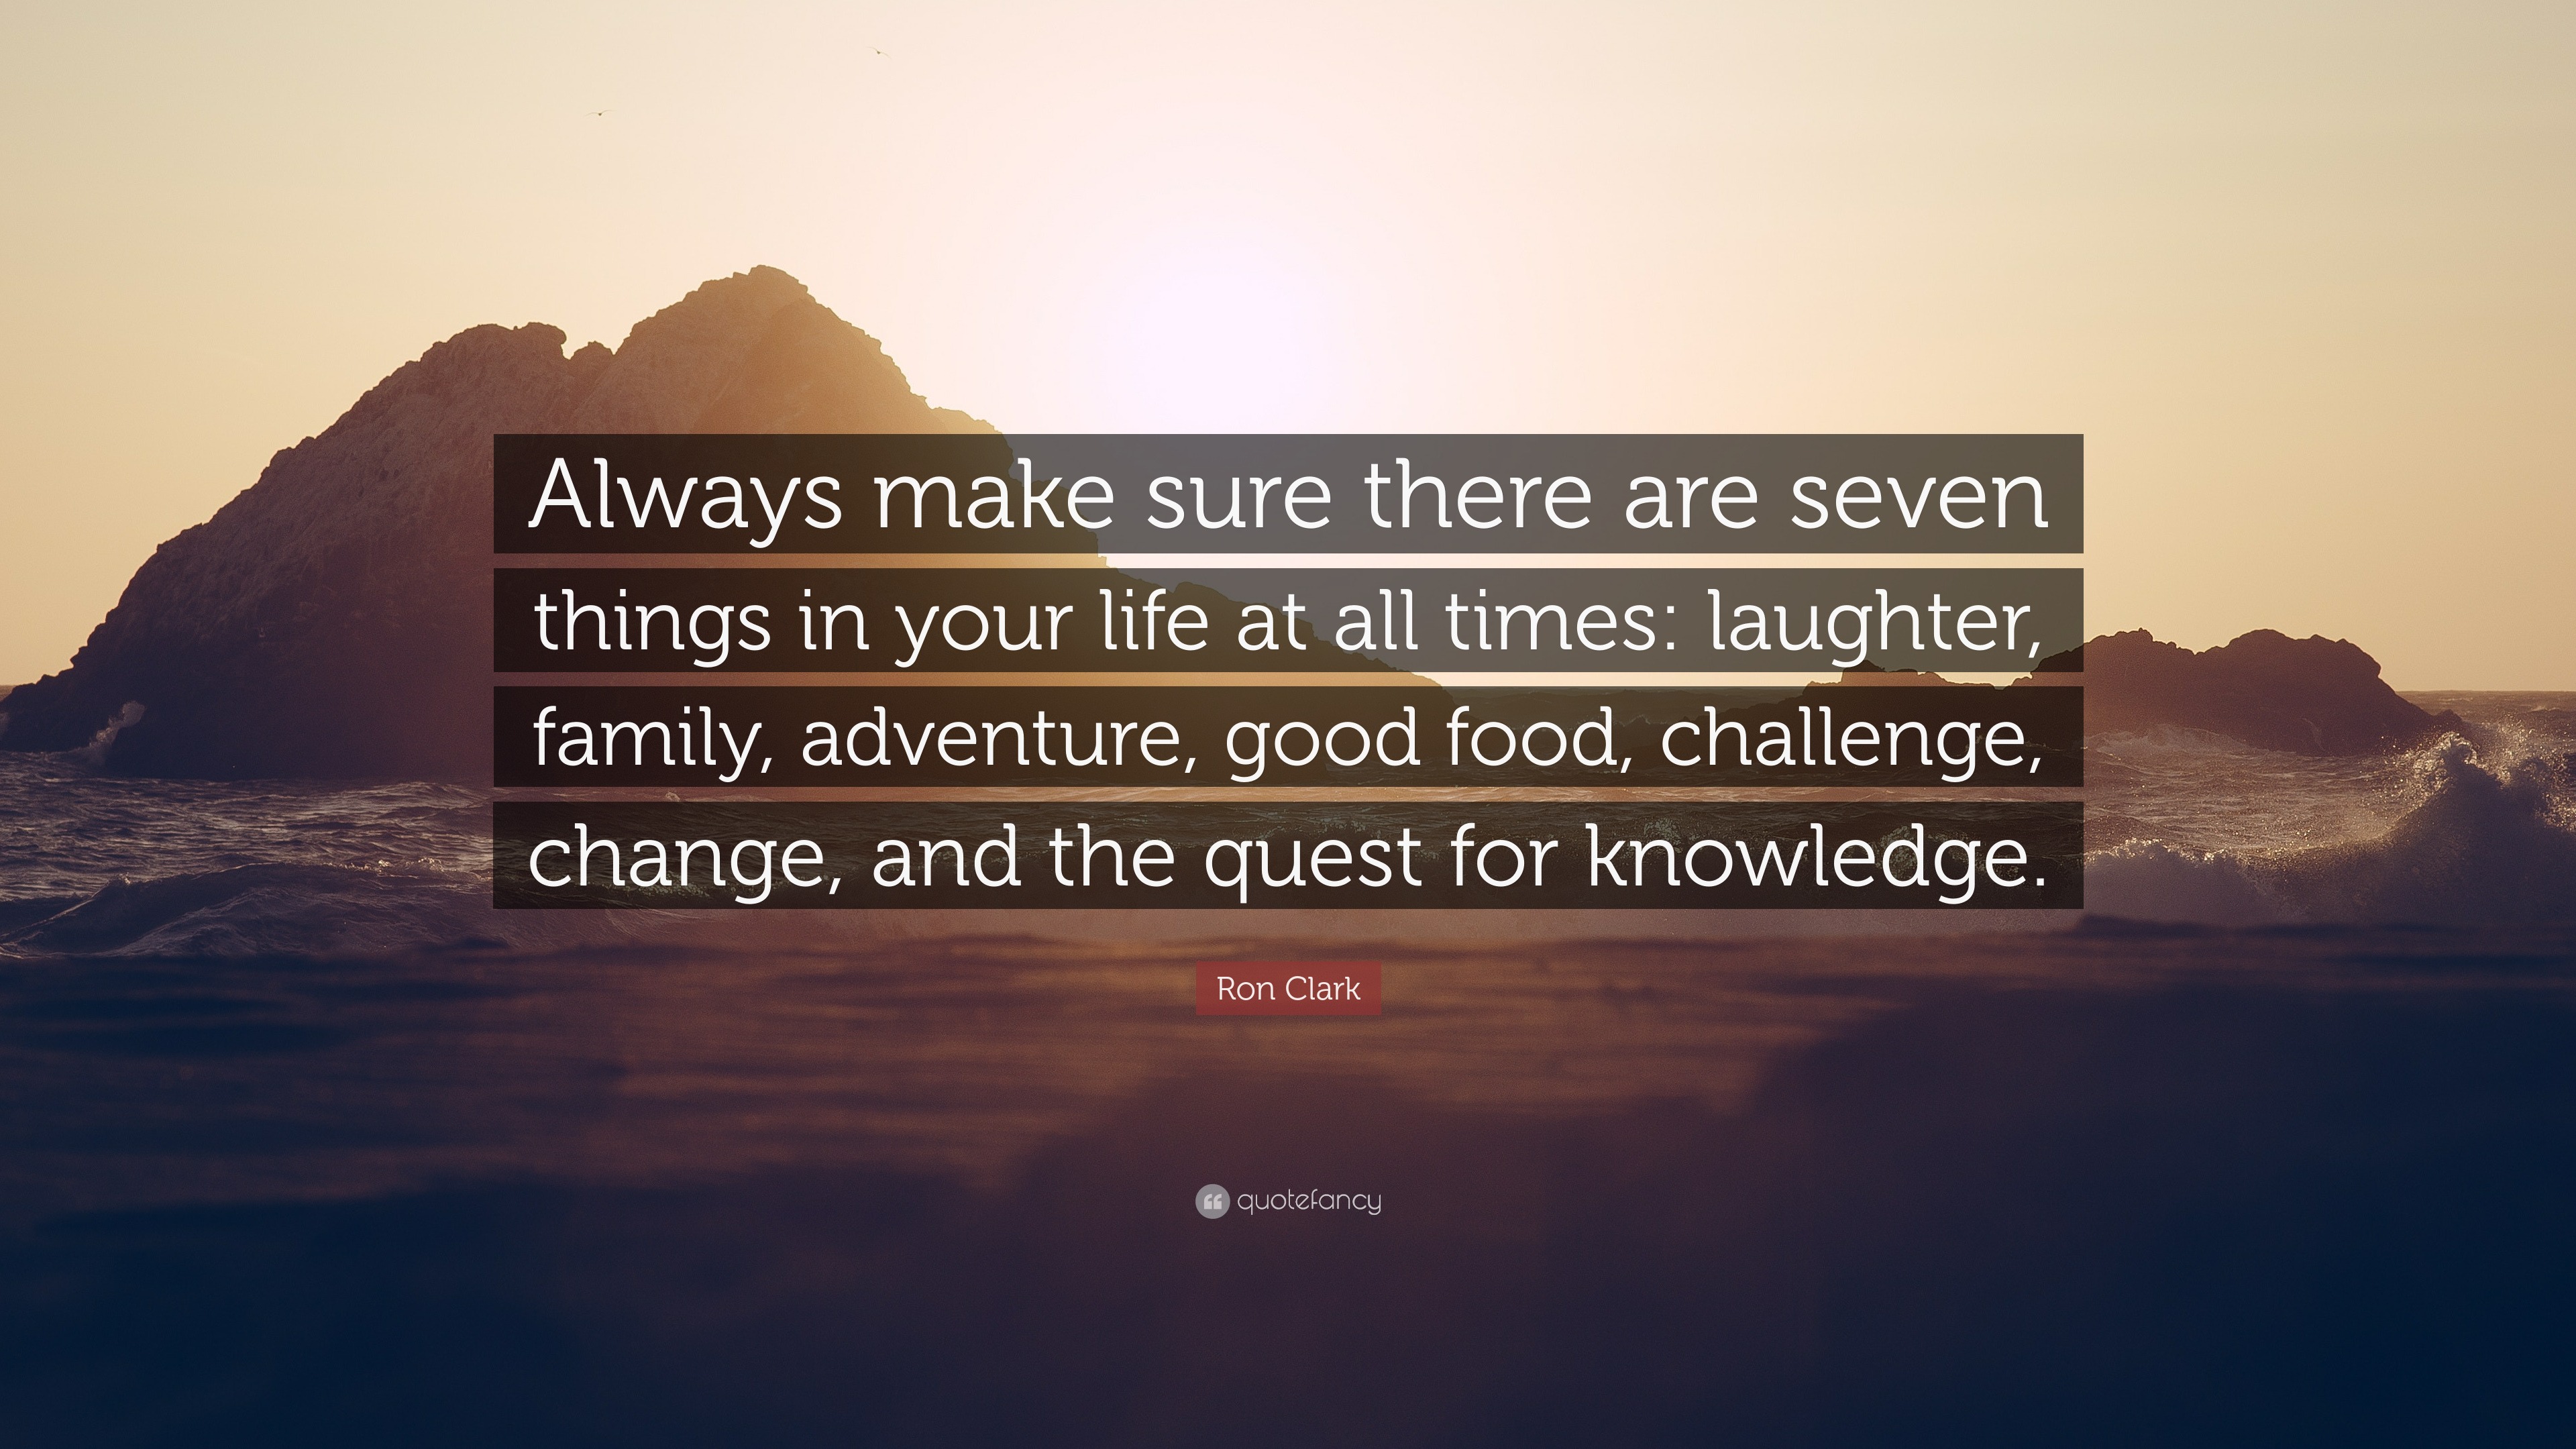 The Adventure Challenge Can Change Your Life